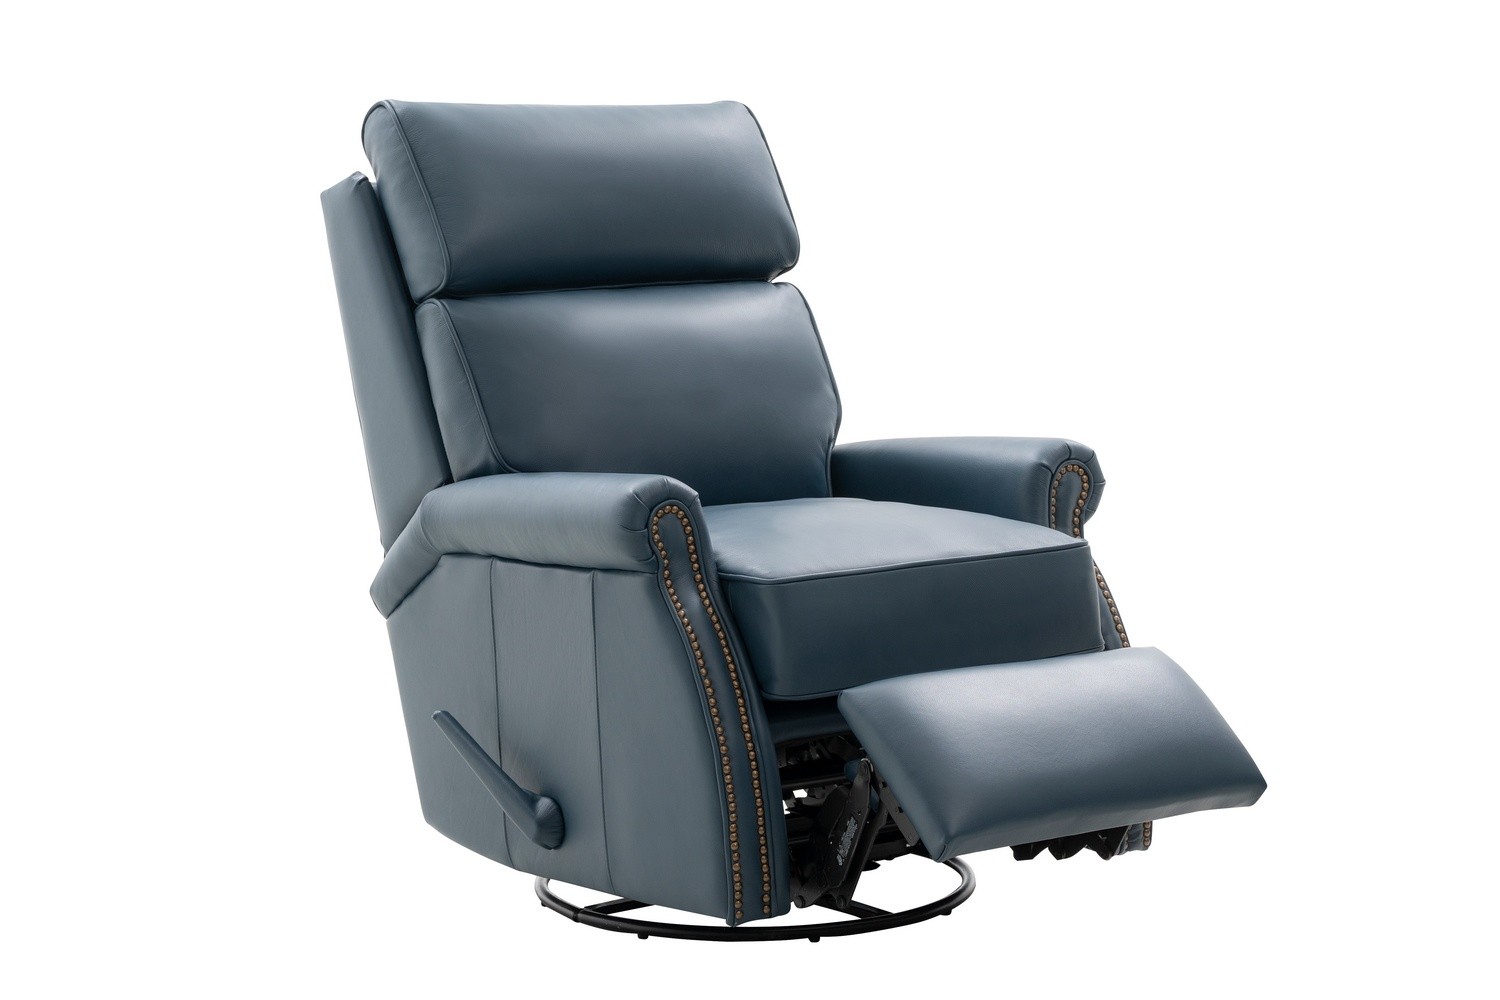 Barcalounger Crews Swivel Glider Recliner Chair - Prestin Yale Blue/All Leather